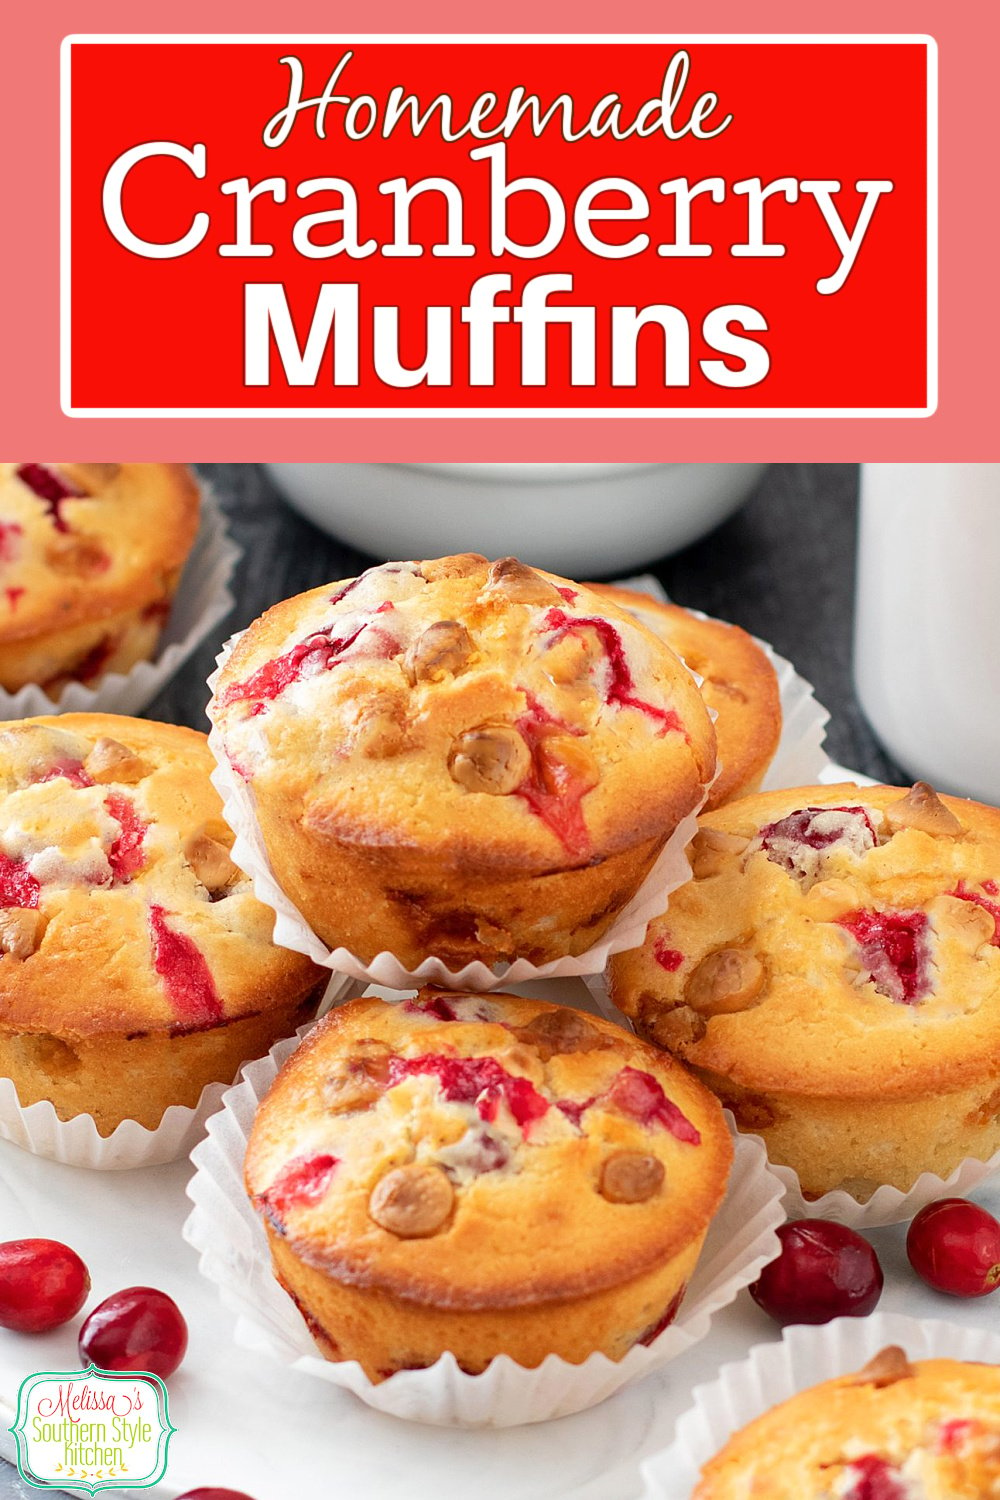 These homemade white chocolate chip Cranberry Muffins are a delicious seasonal option for breakfast, brunch, tea time or dessert #cranberrymuffins #cranberries #whitechocolate #breakfastrecipes #brunchrecipes #easyrecipes #muffinrecipes via @melissasssk